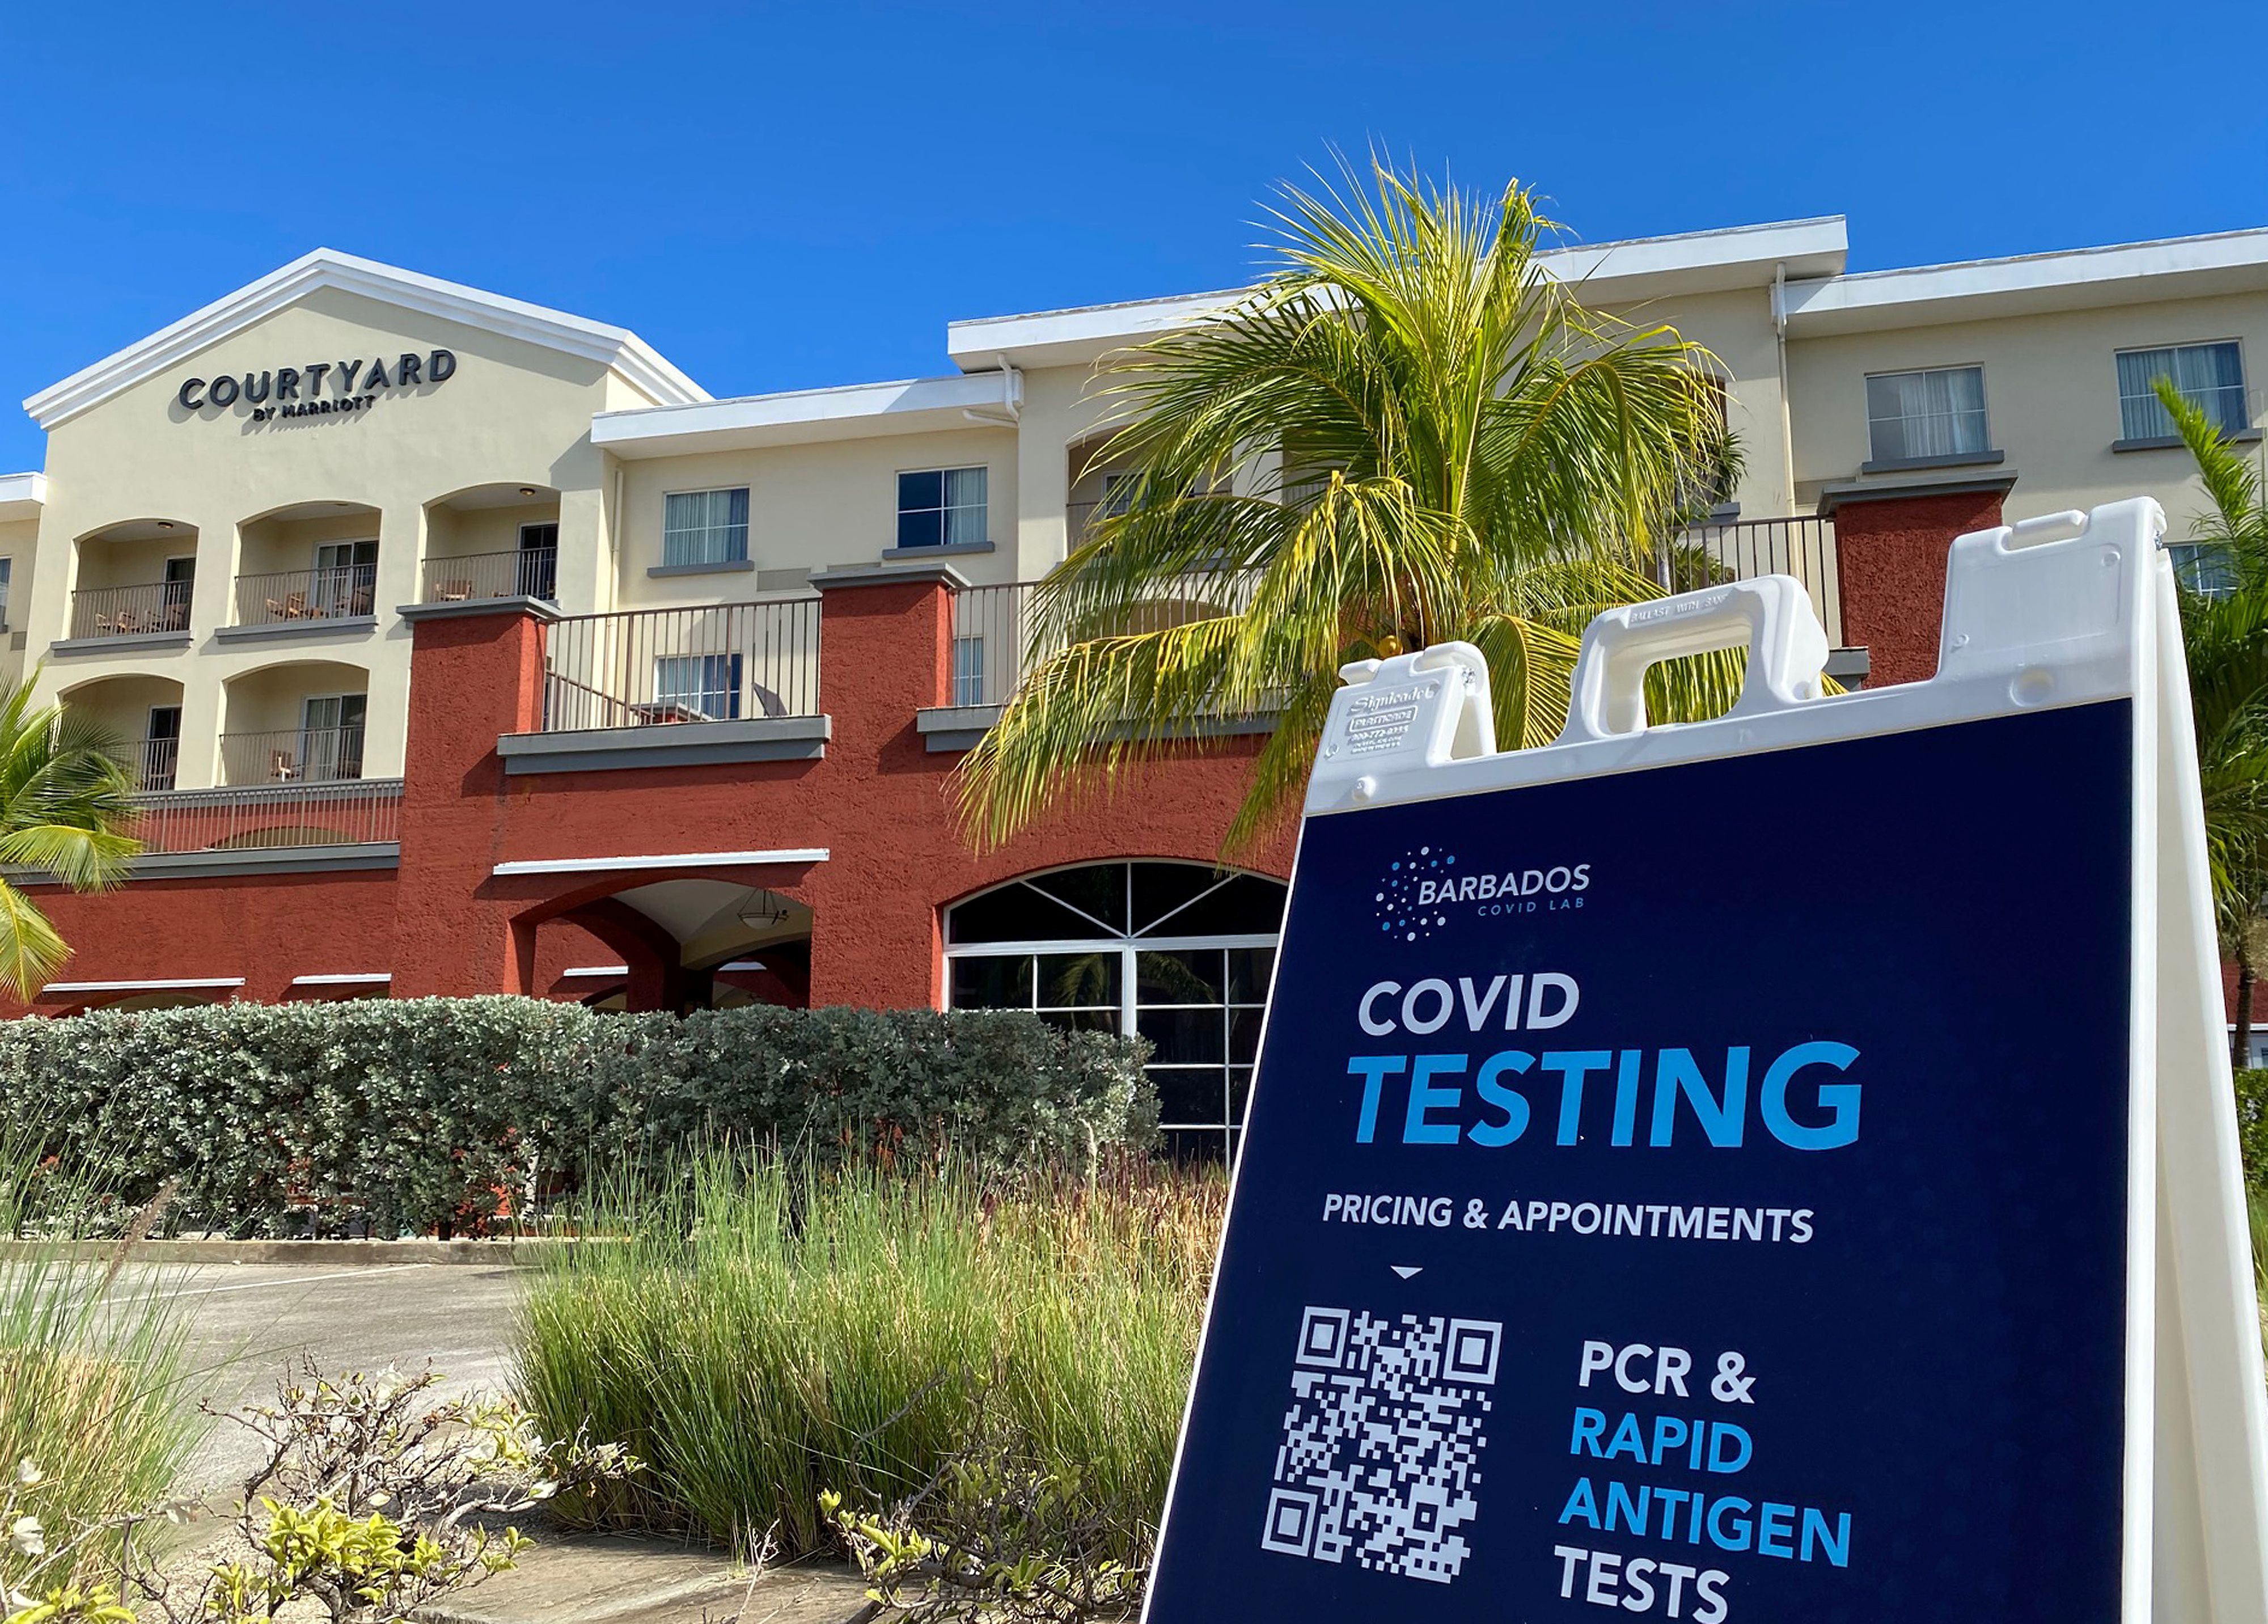 A COVID-19 testing sign is seen outside a hotel, amidst the spread of the coronavirus disease pandemic, in Bridgetown, Barbados, November 29, 2021. REUTERS/Toby Melville